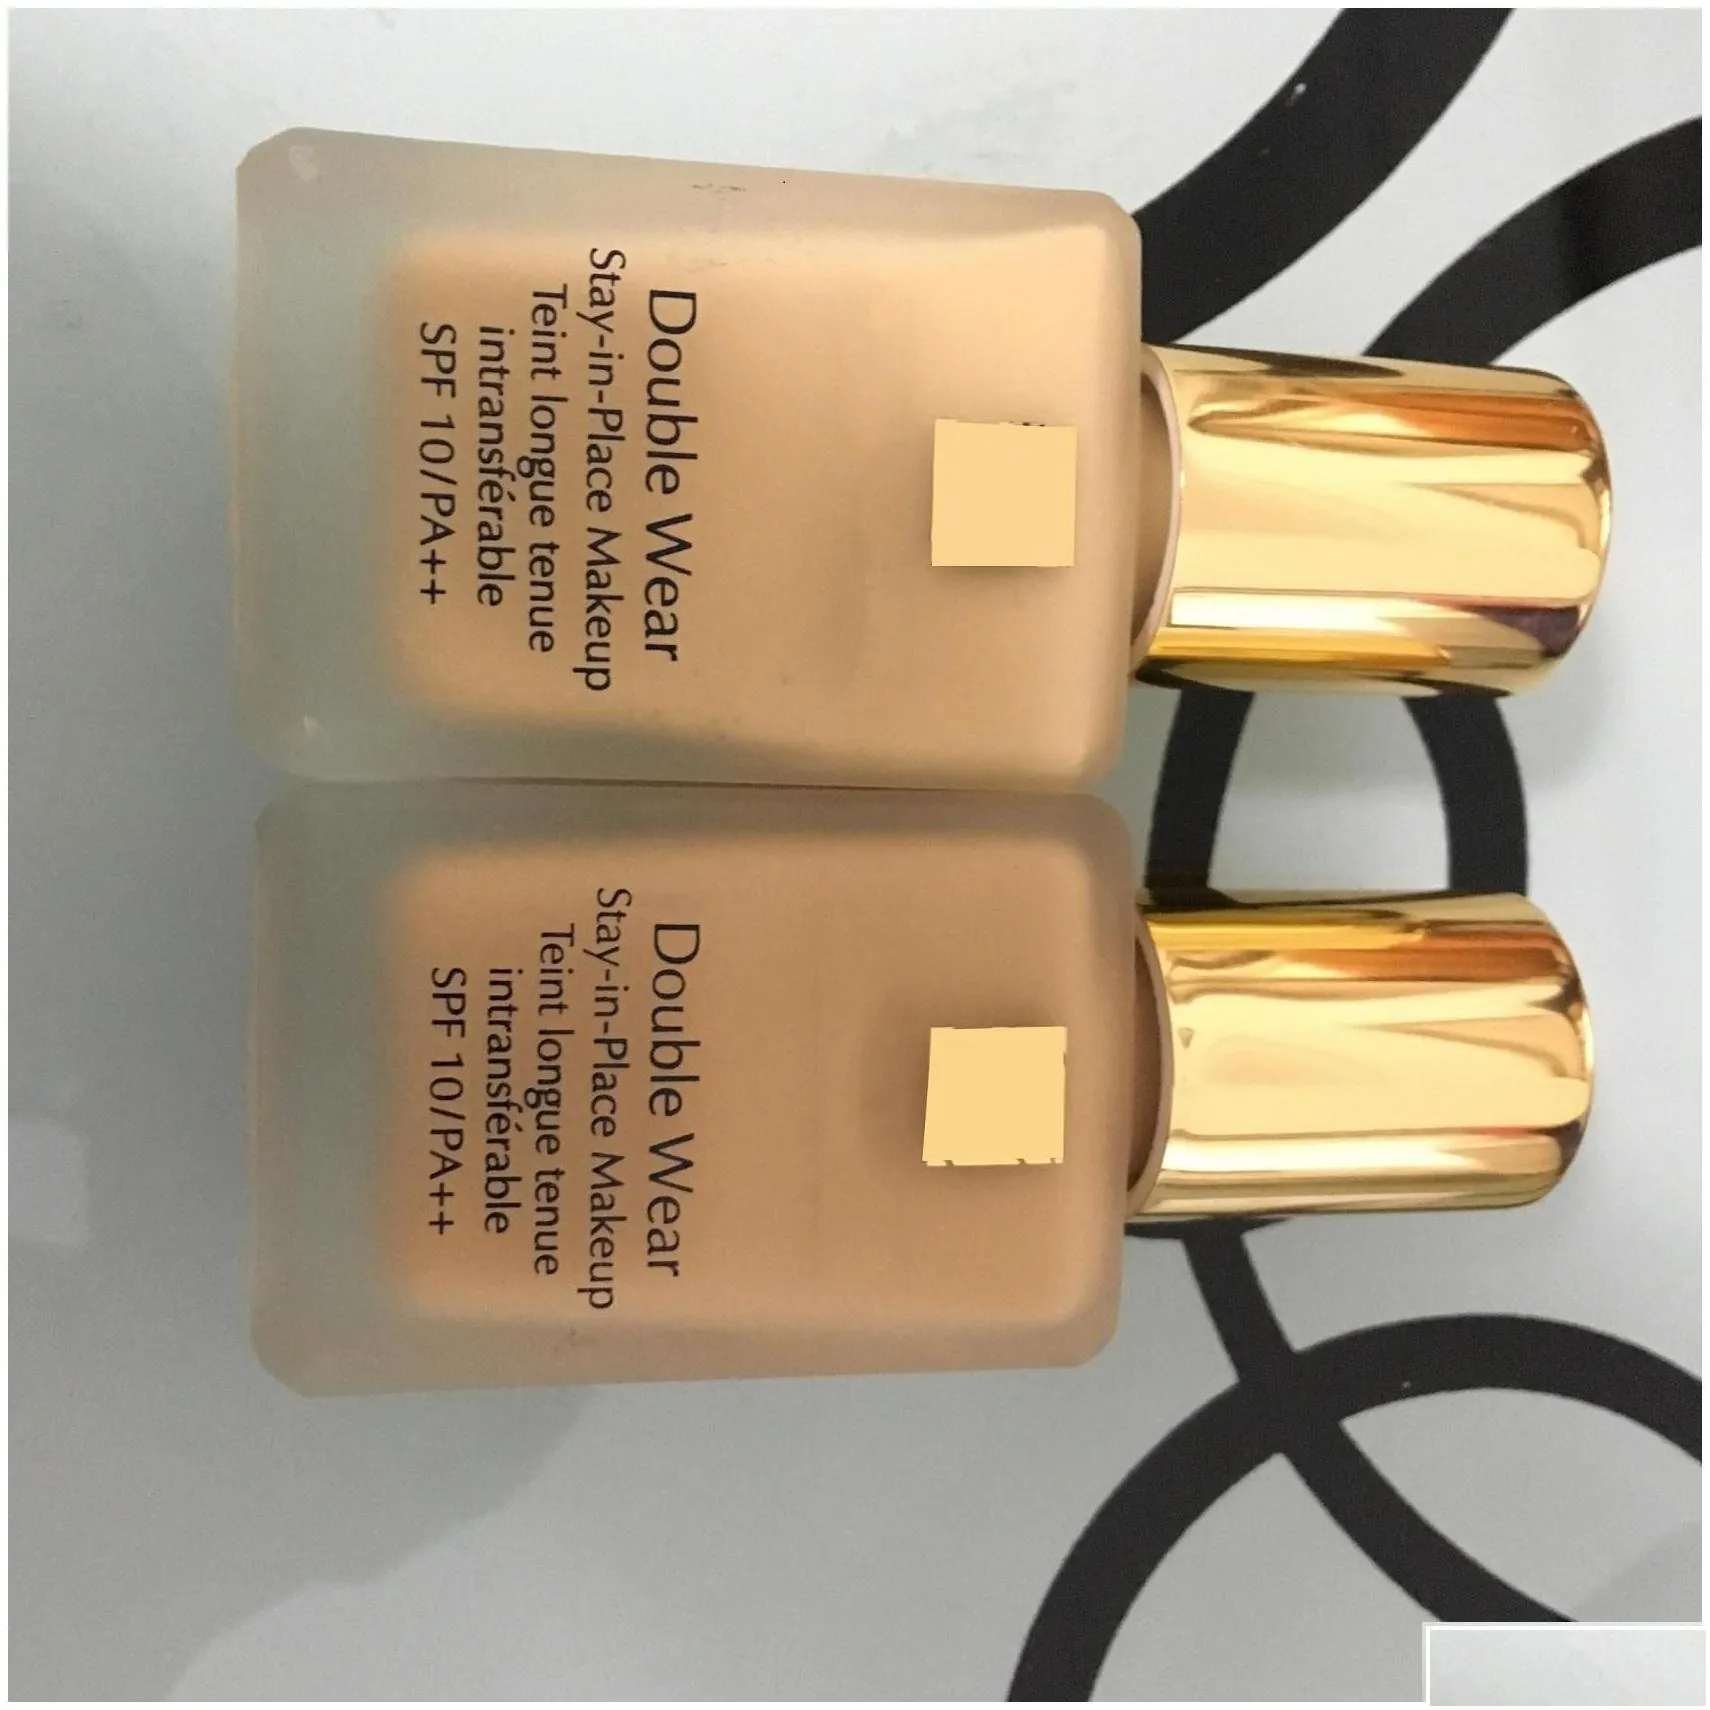 foundation ouble wear liquid cosmetics 30ml spf10 matte cream makeup drop delivery health beauty face dh2og